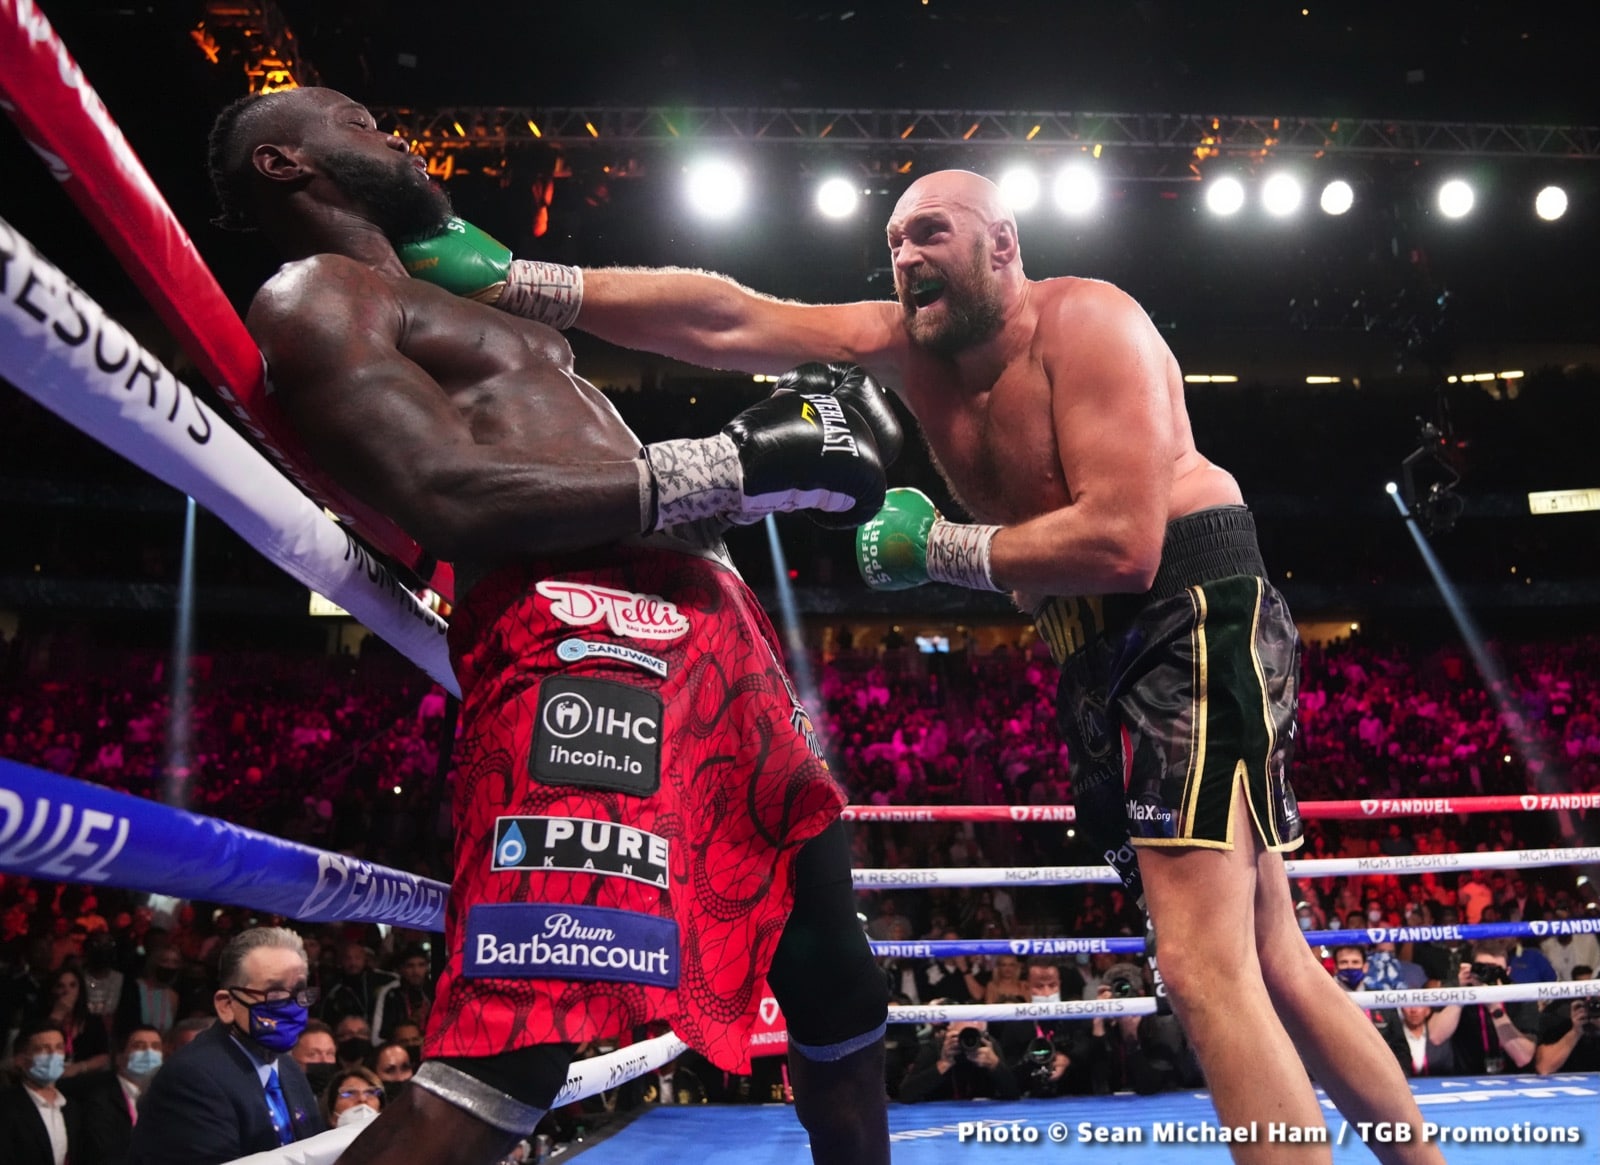 Image: Deontay Wilder's poor stamina = "Not normal" - says Hearn